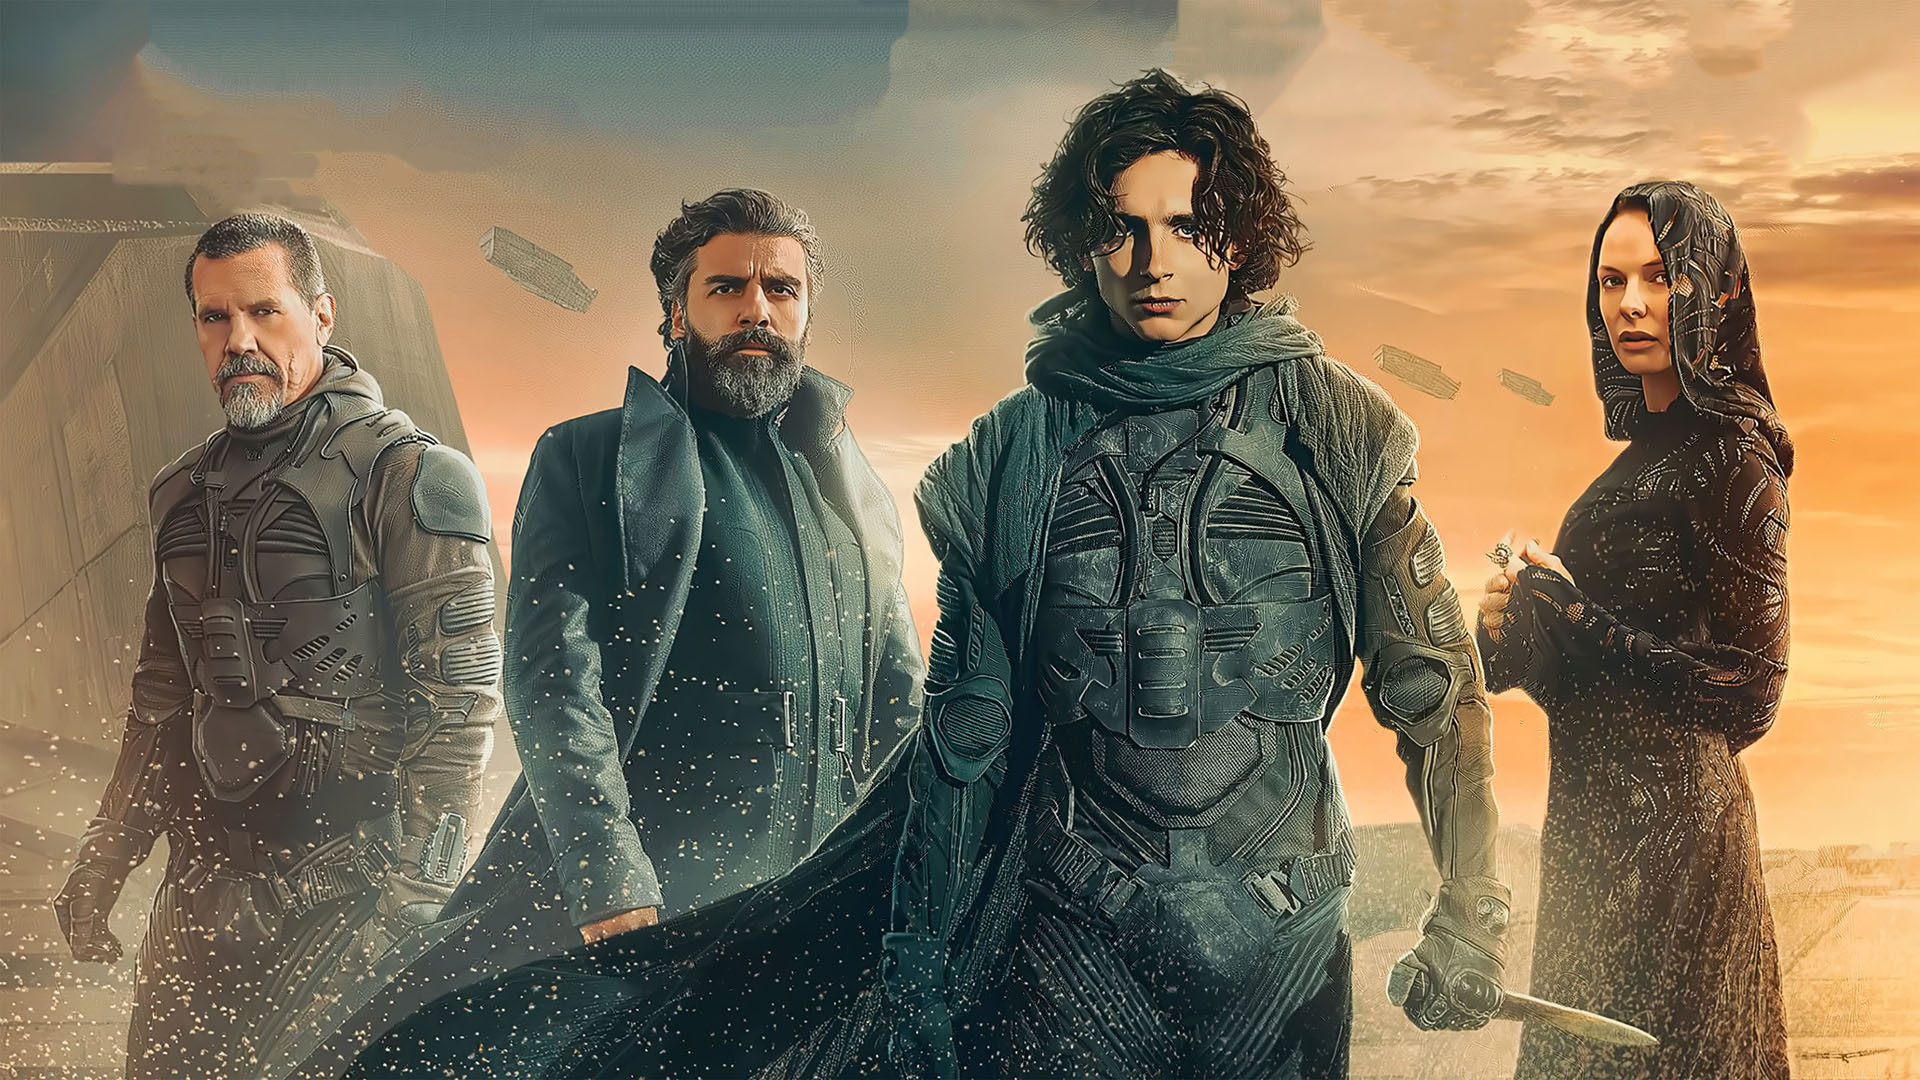 Dune cast stand in the desert for a promotional image